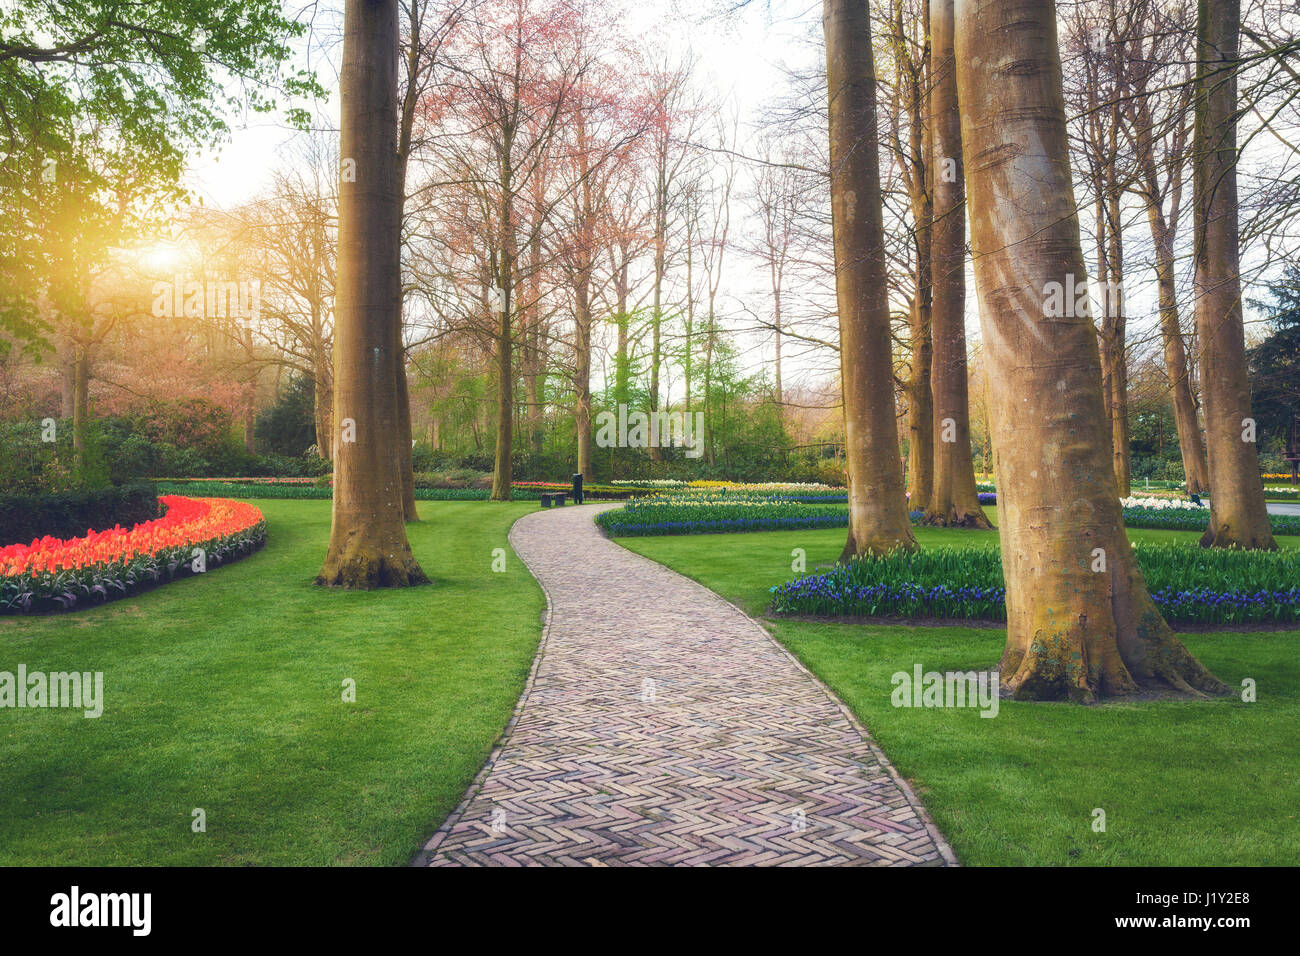 Walkway through the Keukenhof park in Netherlands at sunset. Landscape with blooming spring garden. Beautiful view with path, trees, green grass Stock Photo